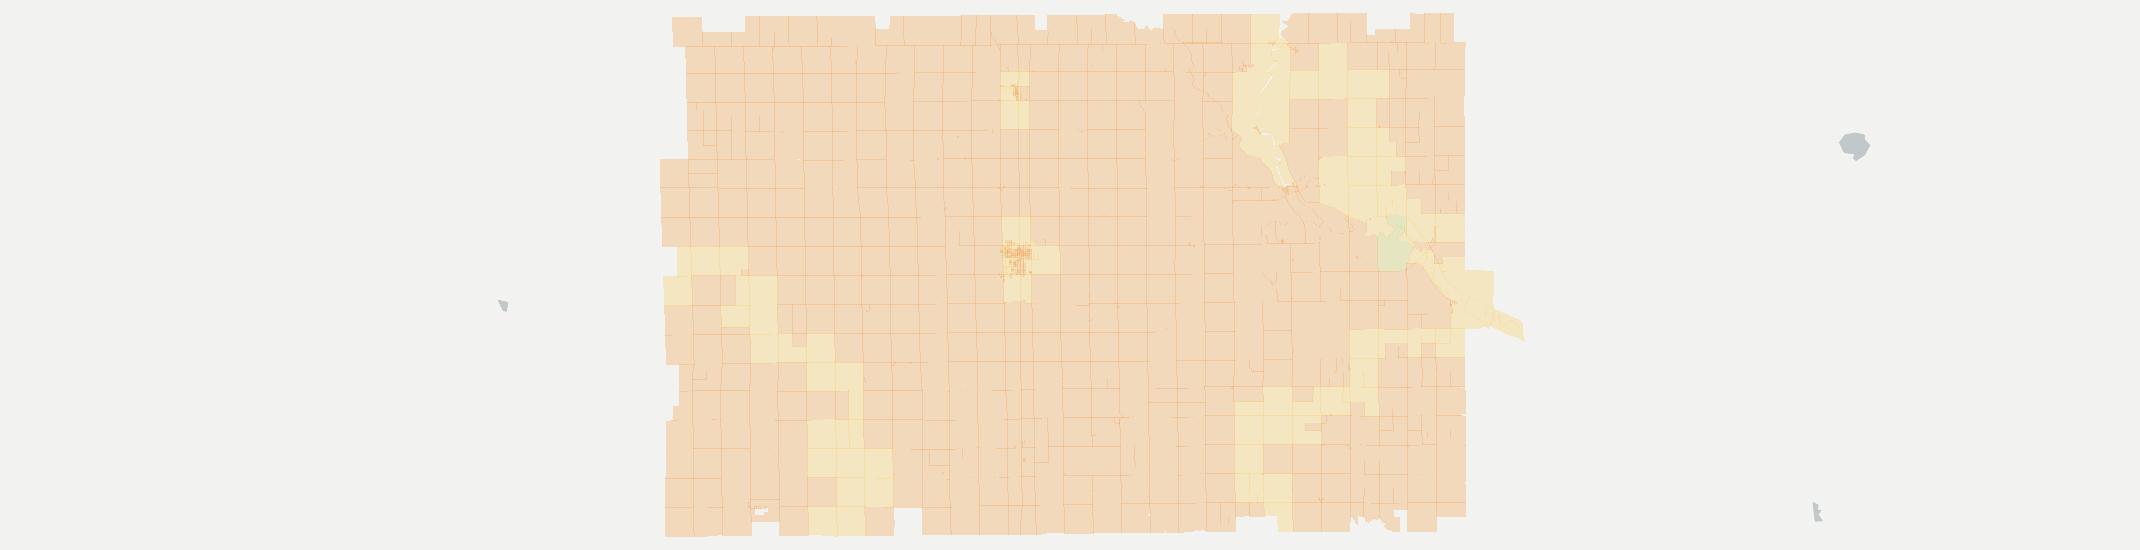 Parkston Internet Competition Map. Click for interactive map.